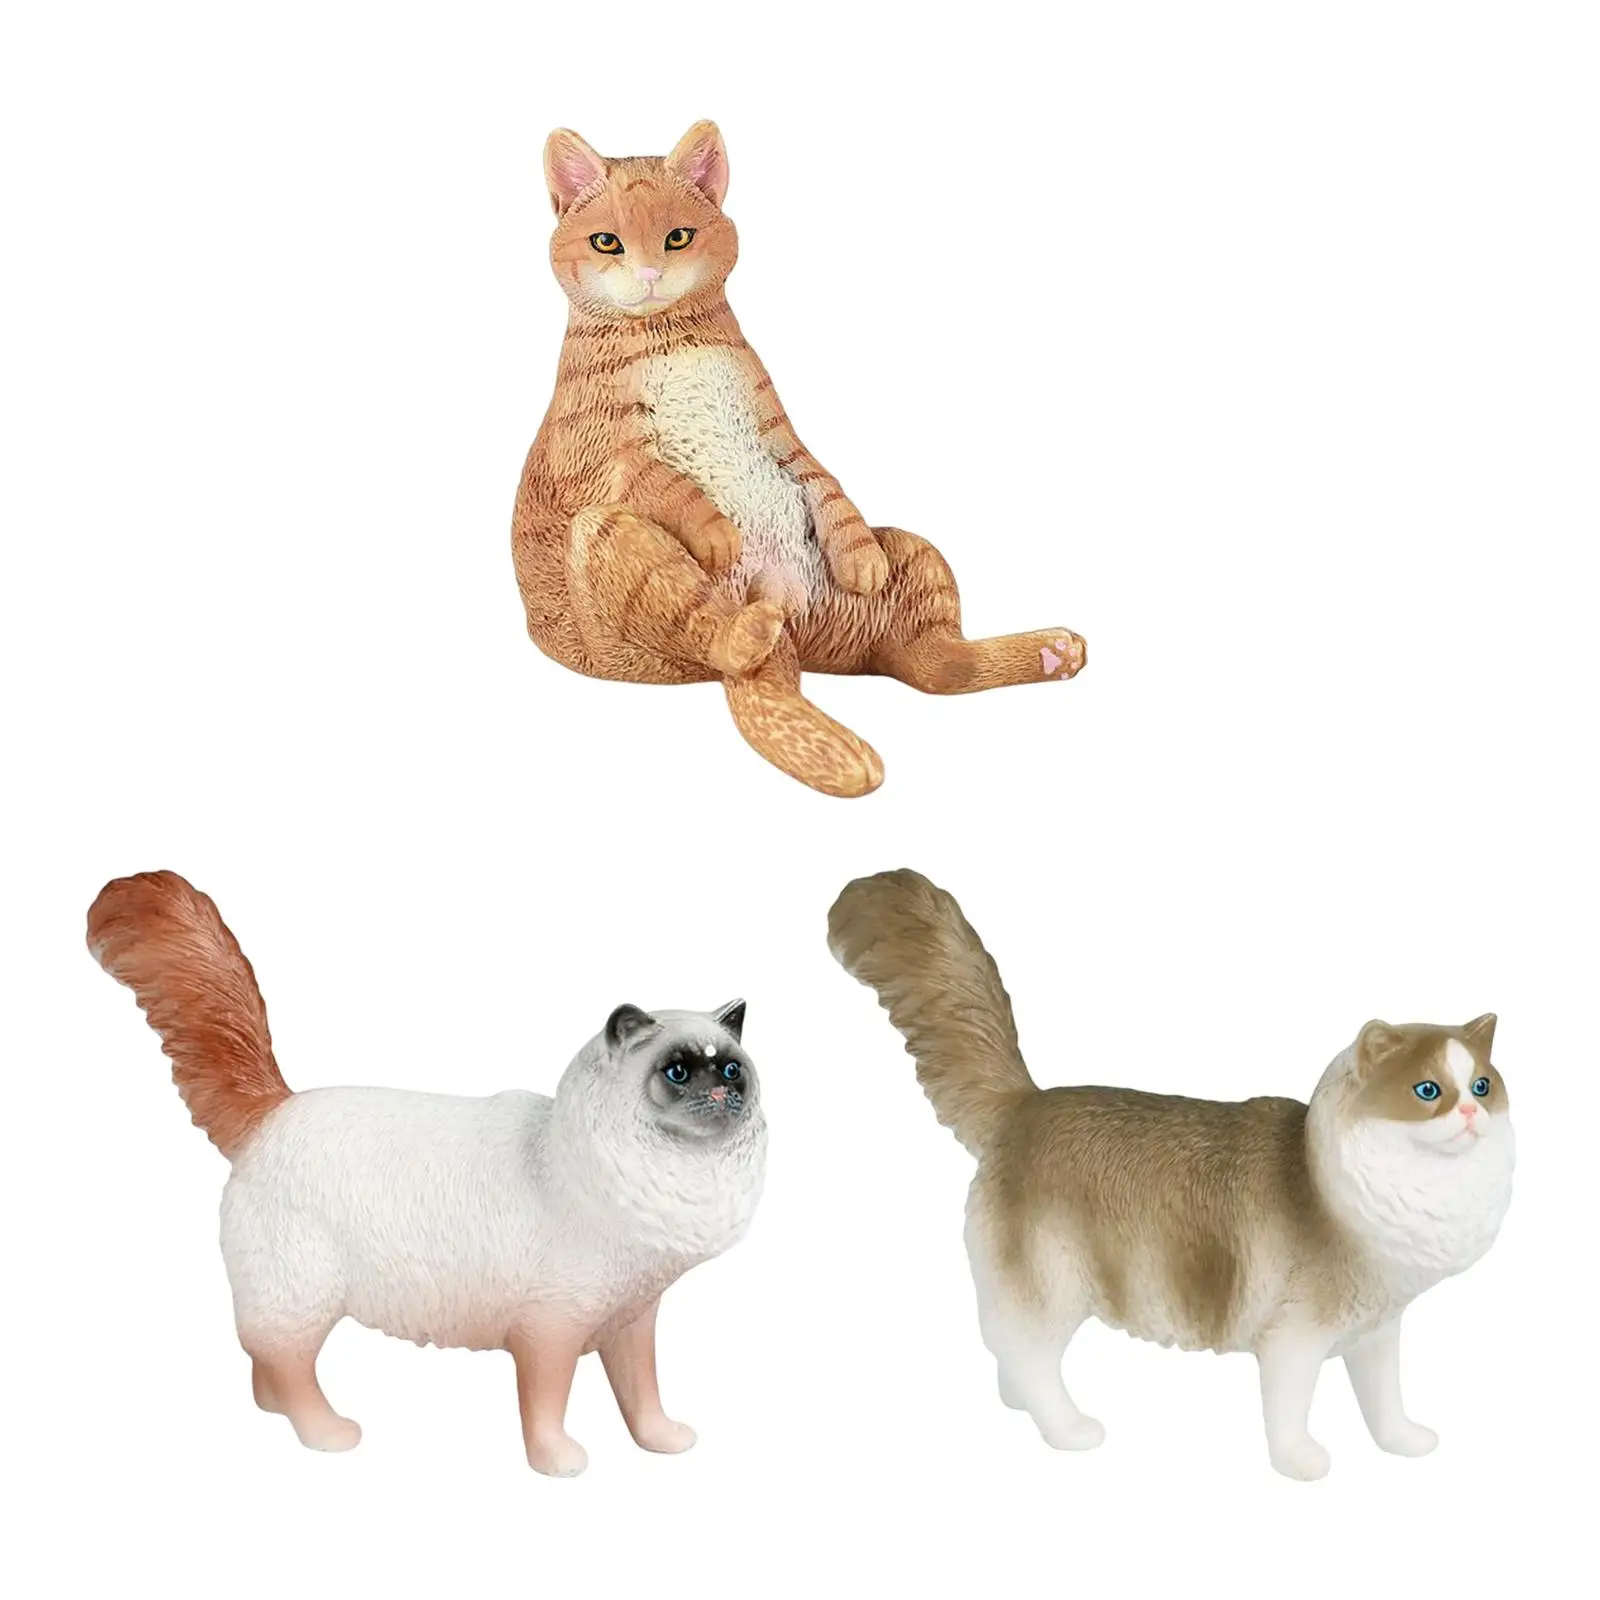 Simulation Cat Figurines Realistic Small Cat Figures Toy for Holiday Gifts